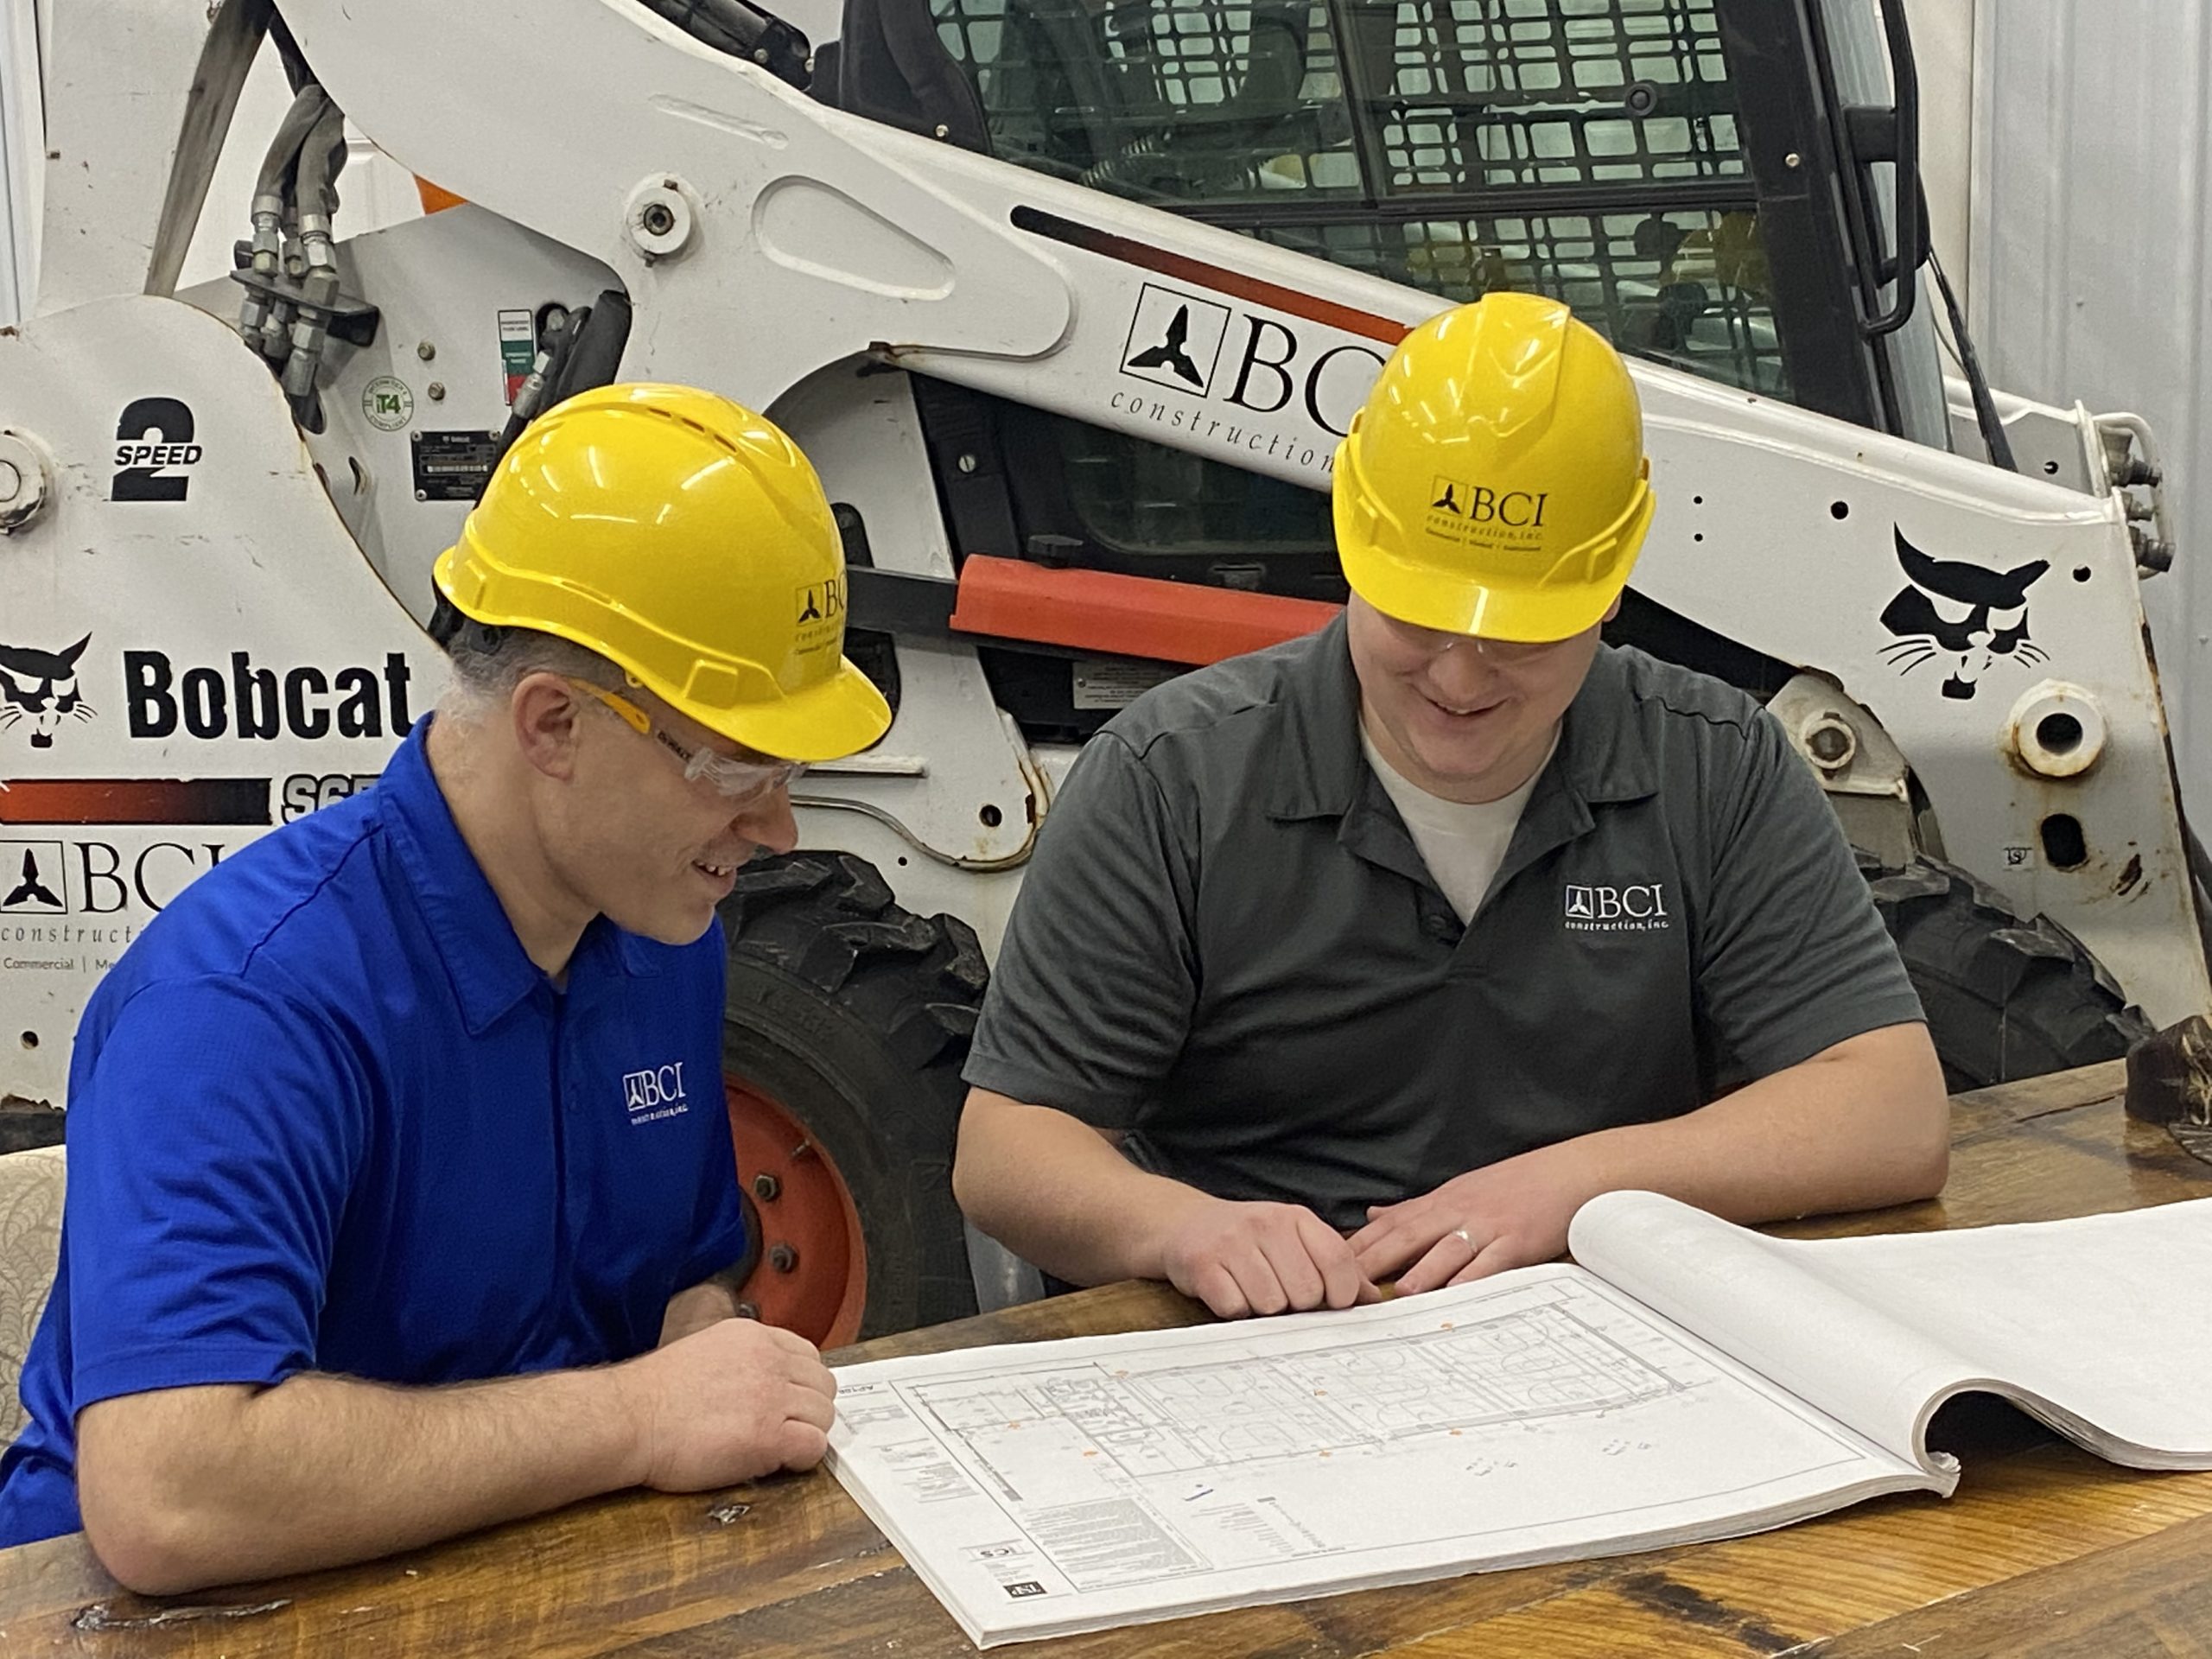 Two construction workers wearing hardhats sit at a table and discuss plans over blueprints with a bobcat in the background